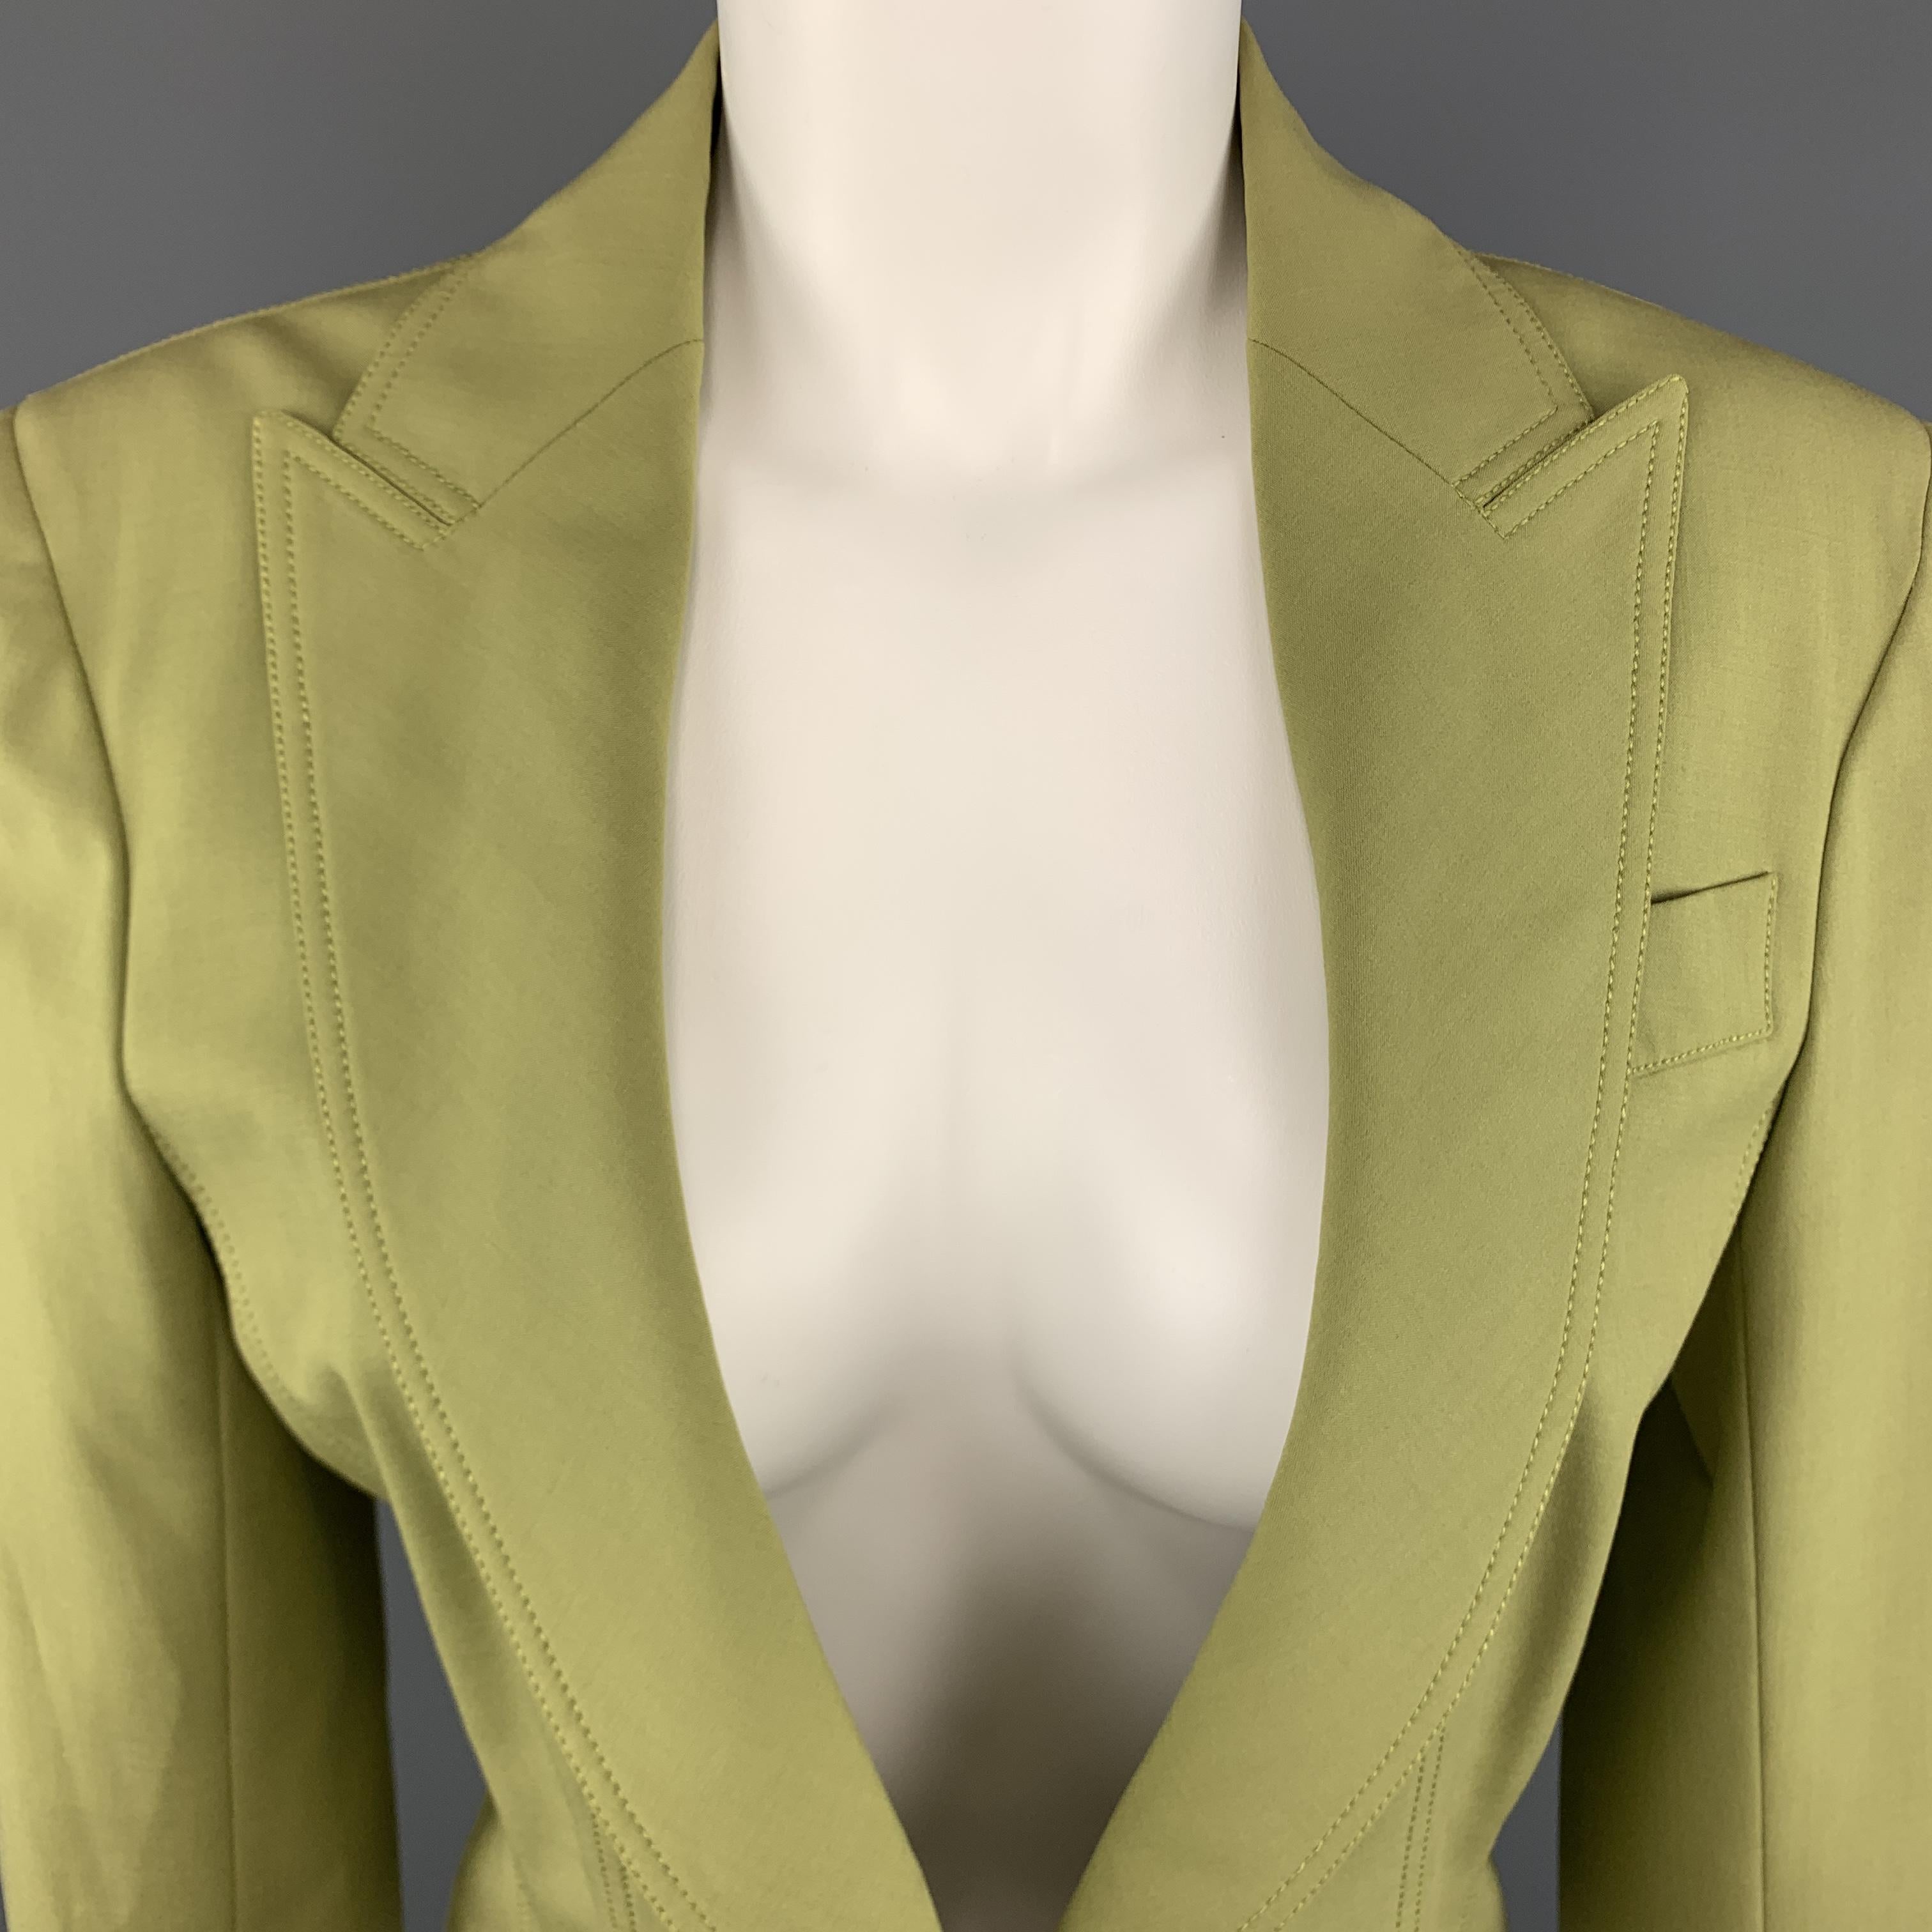 JOHN GALLIANO  Cropped Jacket comes in a green tone in a viscose blend material, with a peak lapel, a deep V-neck, a faux slit pocket, a single button at closure, single breasted. Made in France.
 
Excellent Pre-Owned Condition.
Marked: US 8
